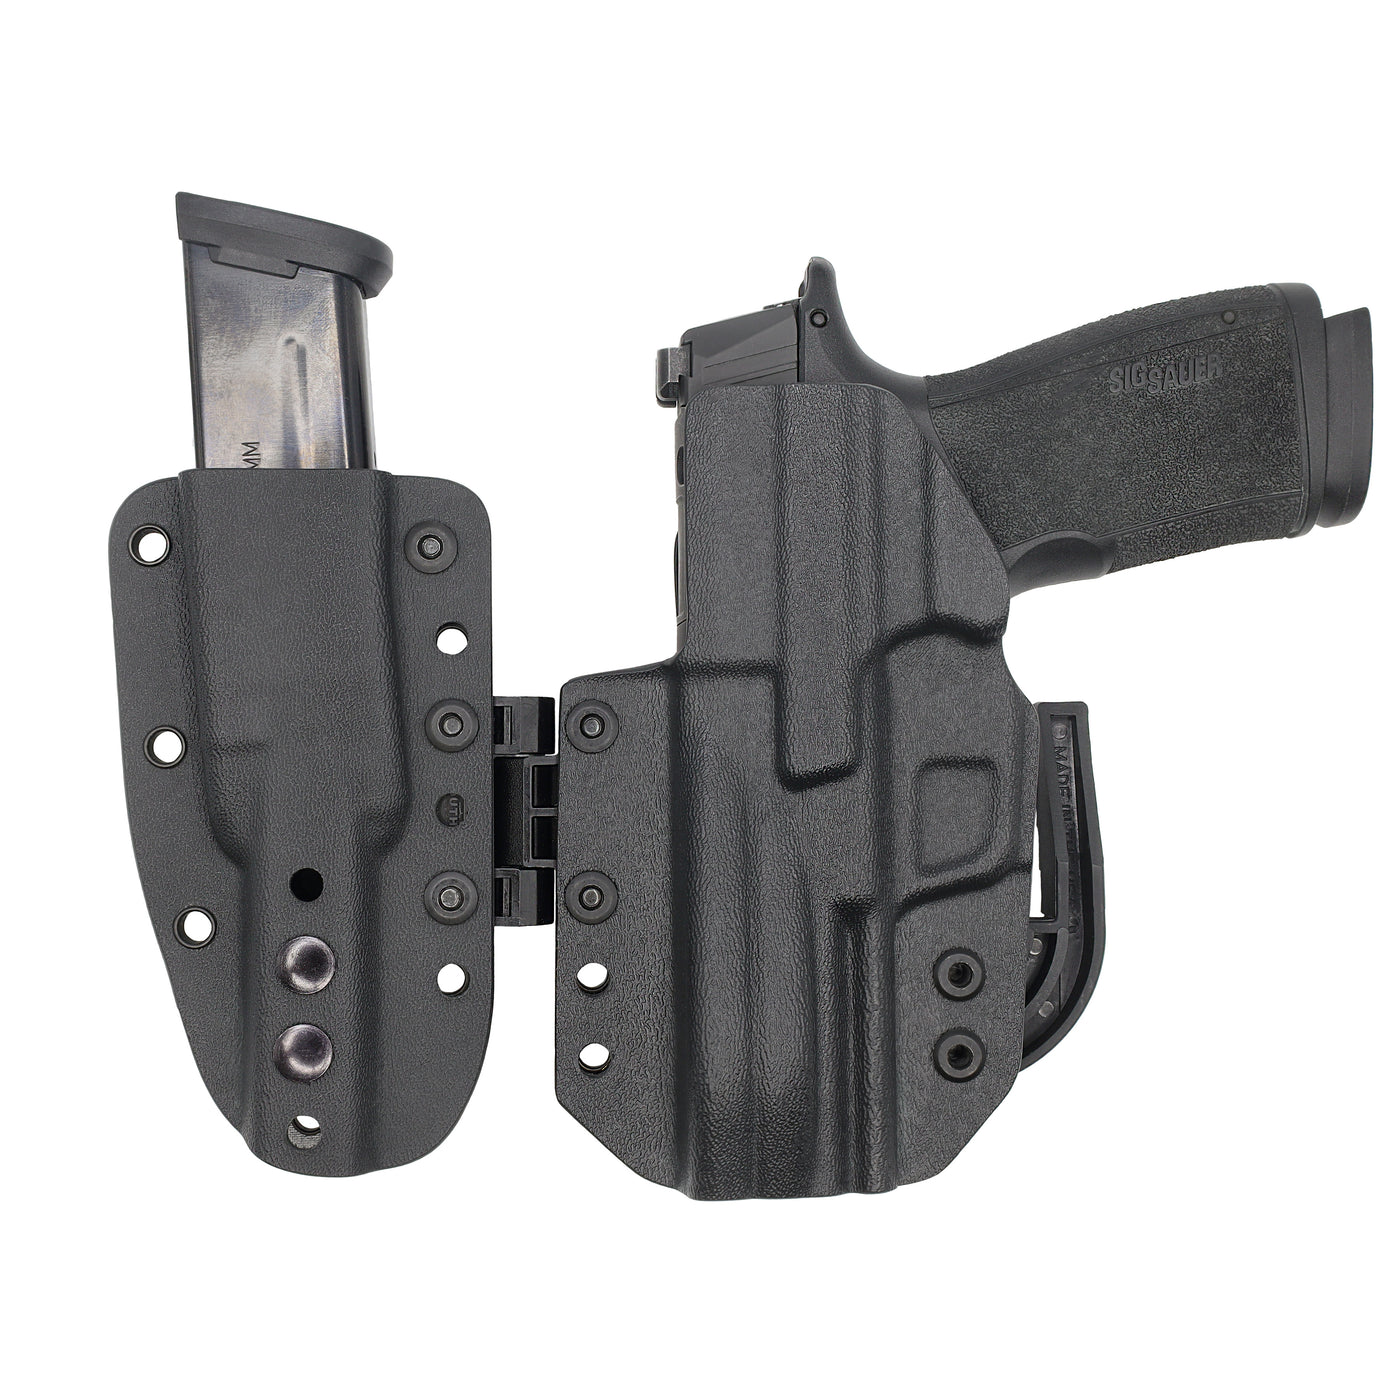 C&G Holsters custom MOD1 P365-XMACRO holstered back view